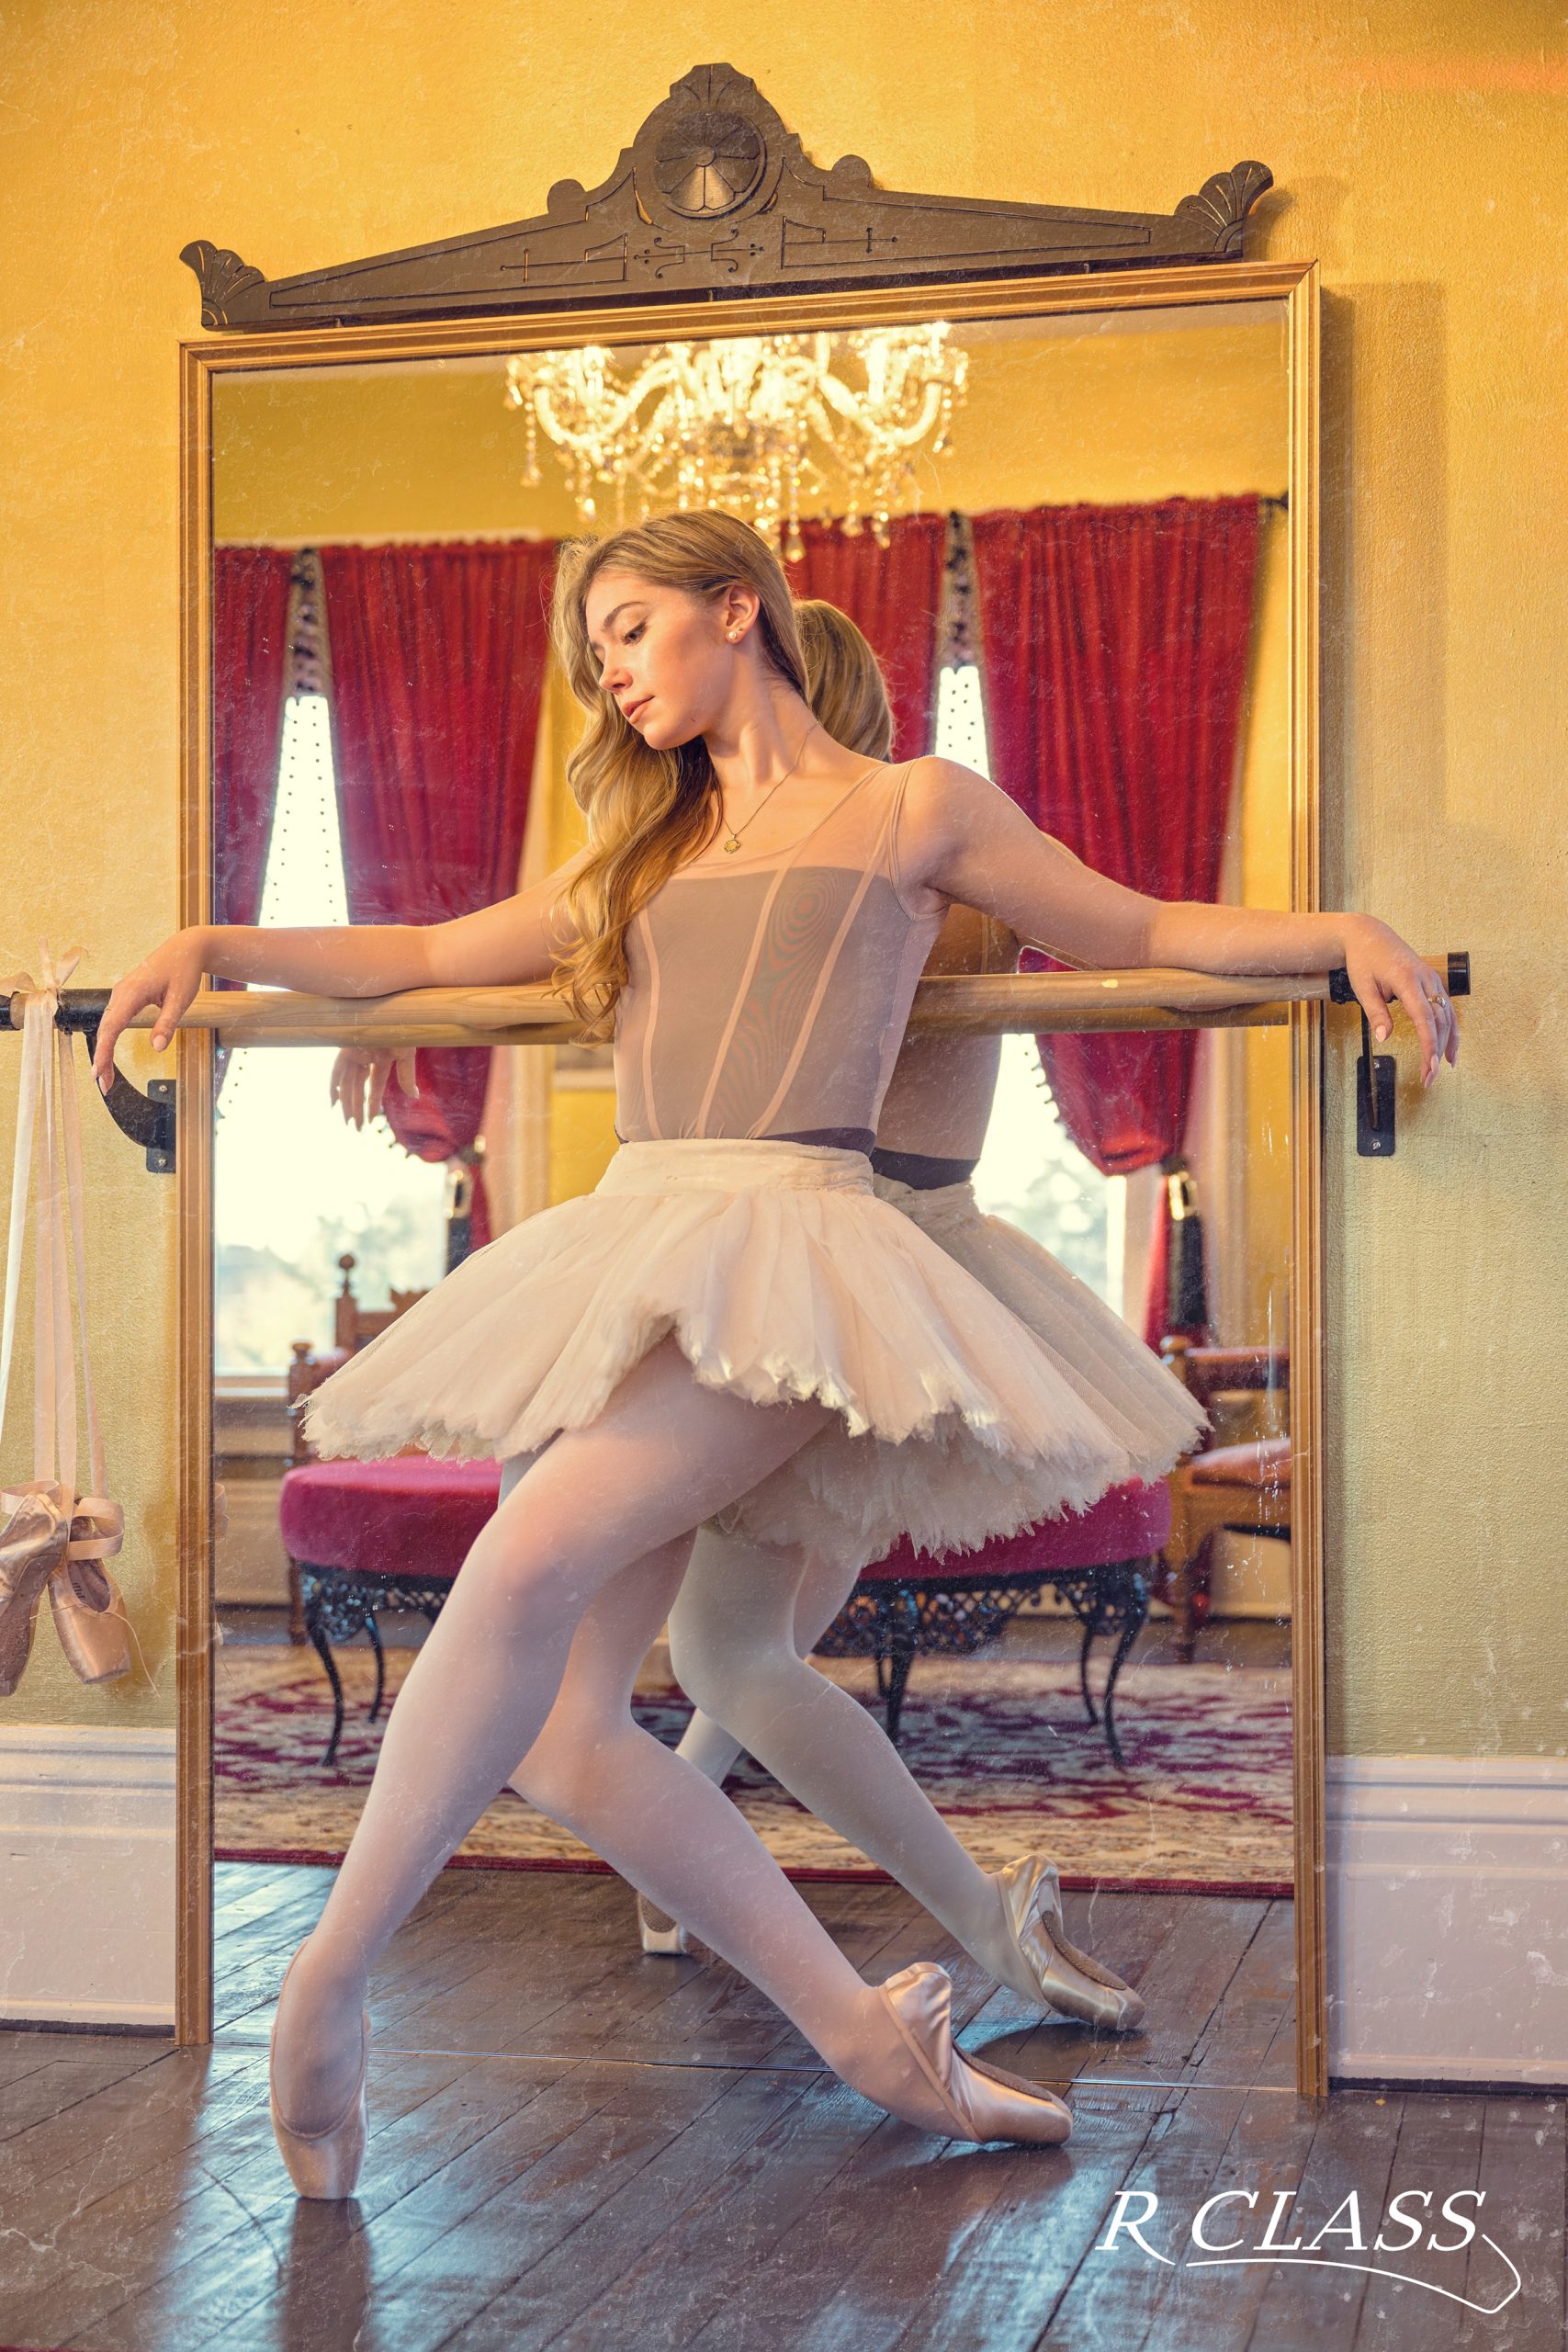 R-Class pointe shoes - russian pointe shoes now available in the US